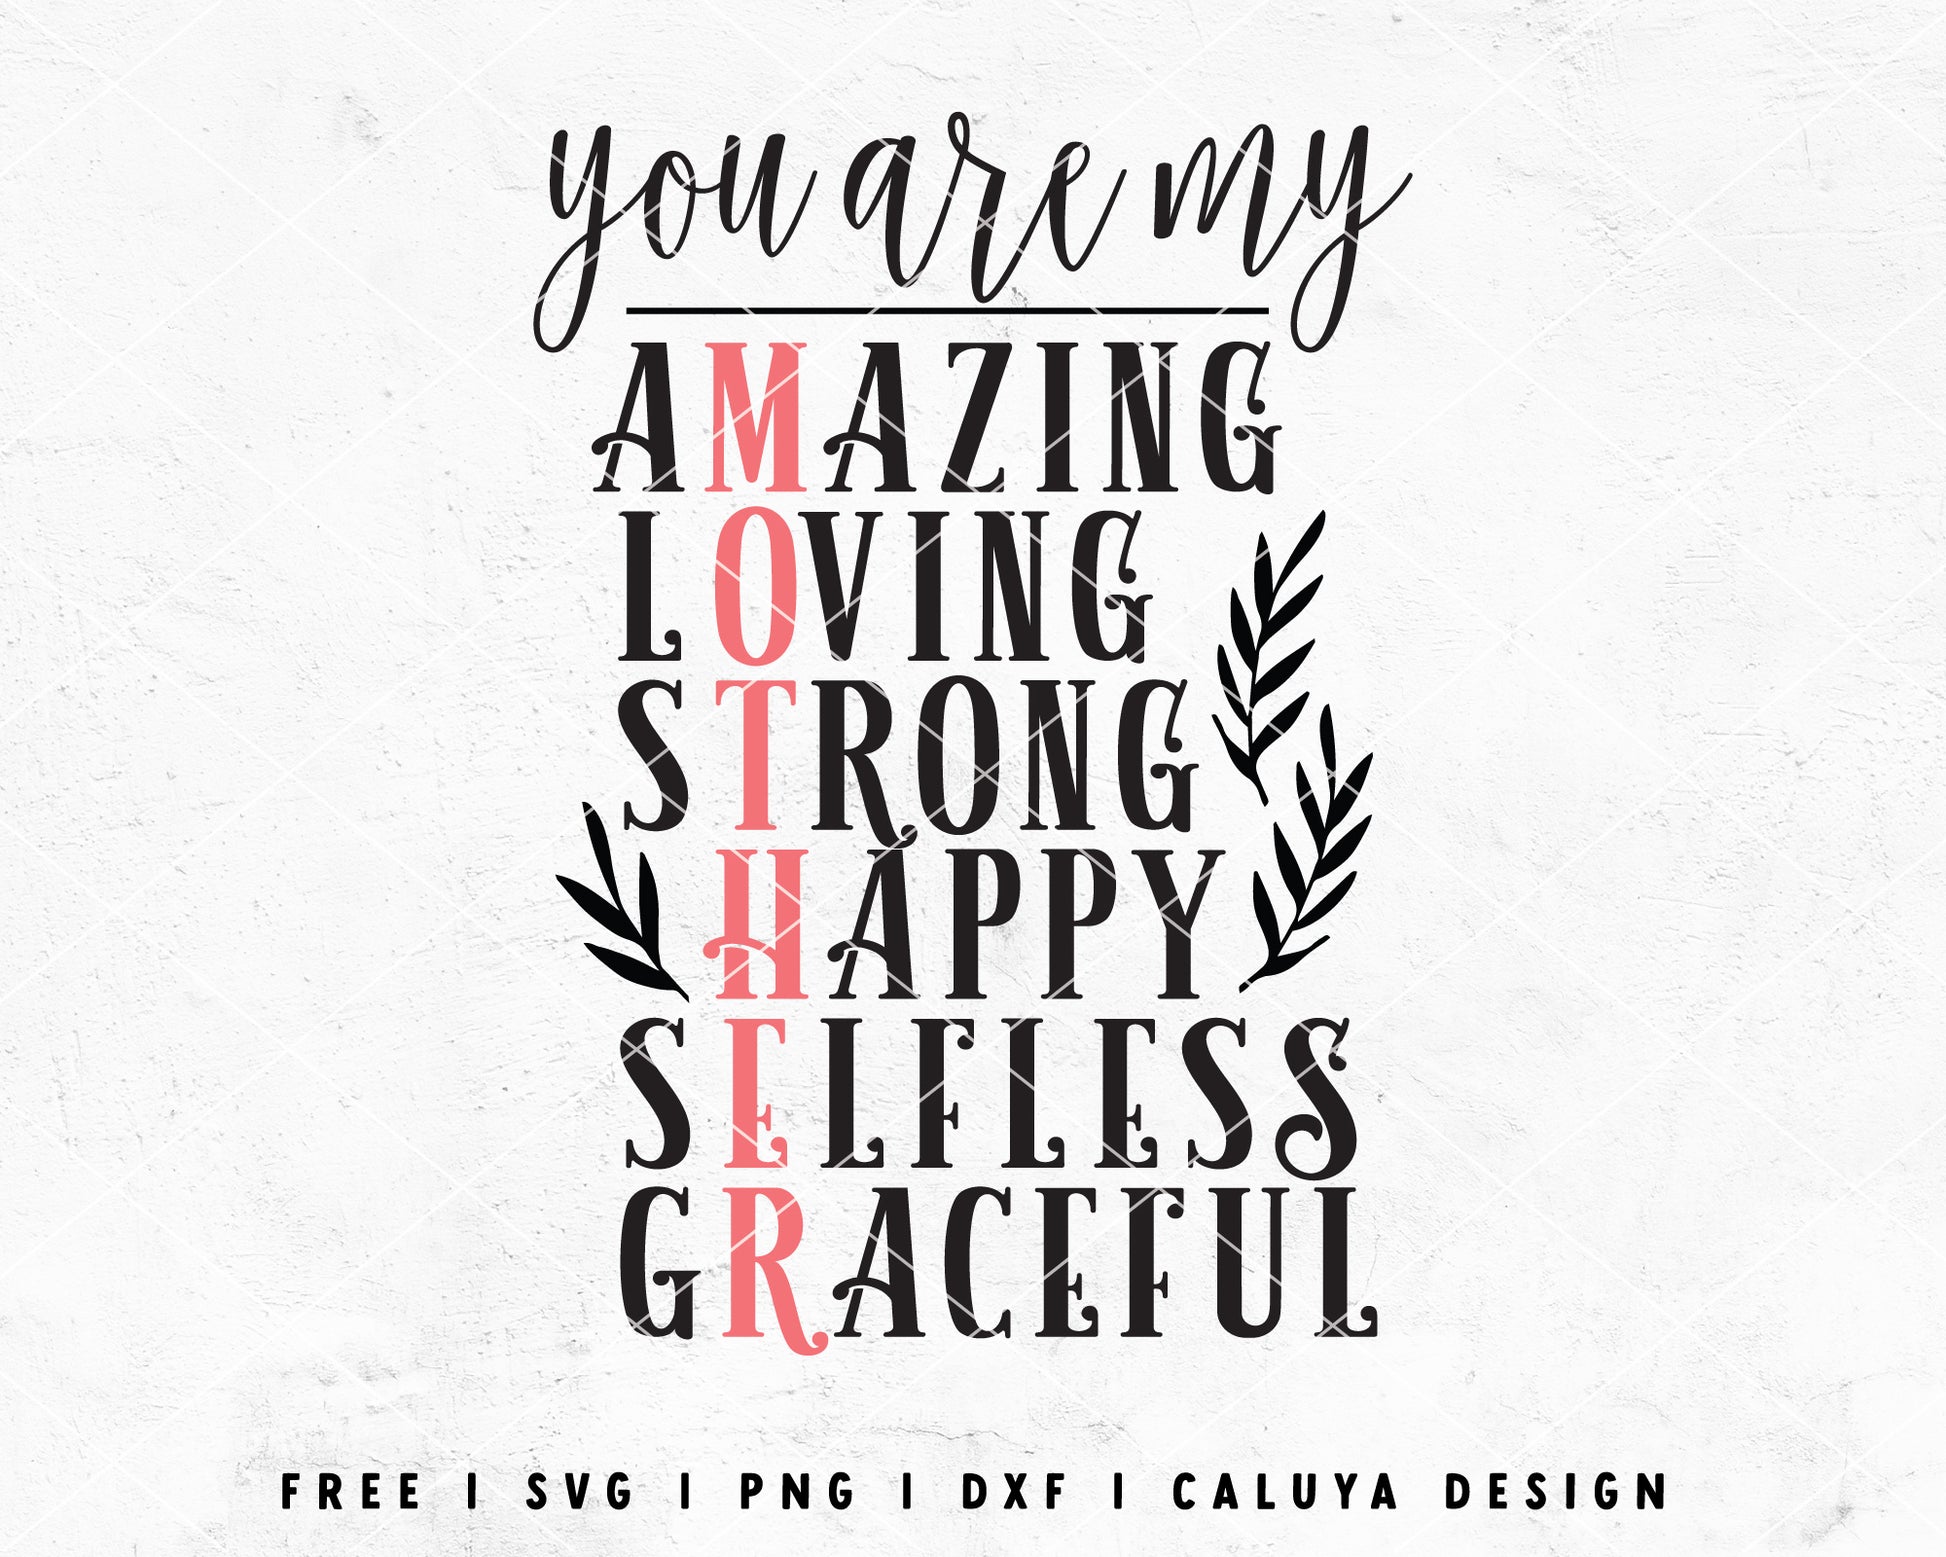 FREE Mom Life SVG | Mother's Day SVG Cut File for Cricut, Cameo Silhouette | Free SVG Cut File